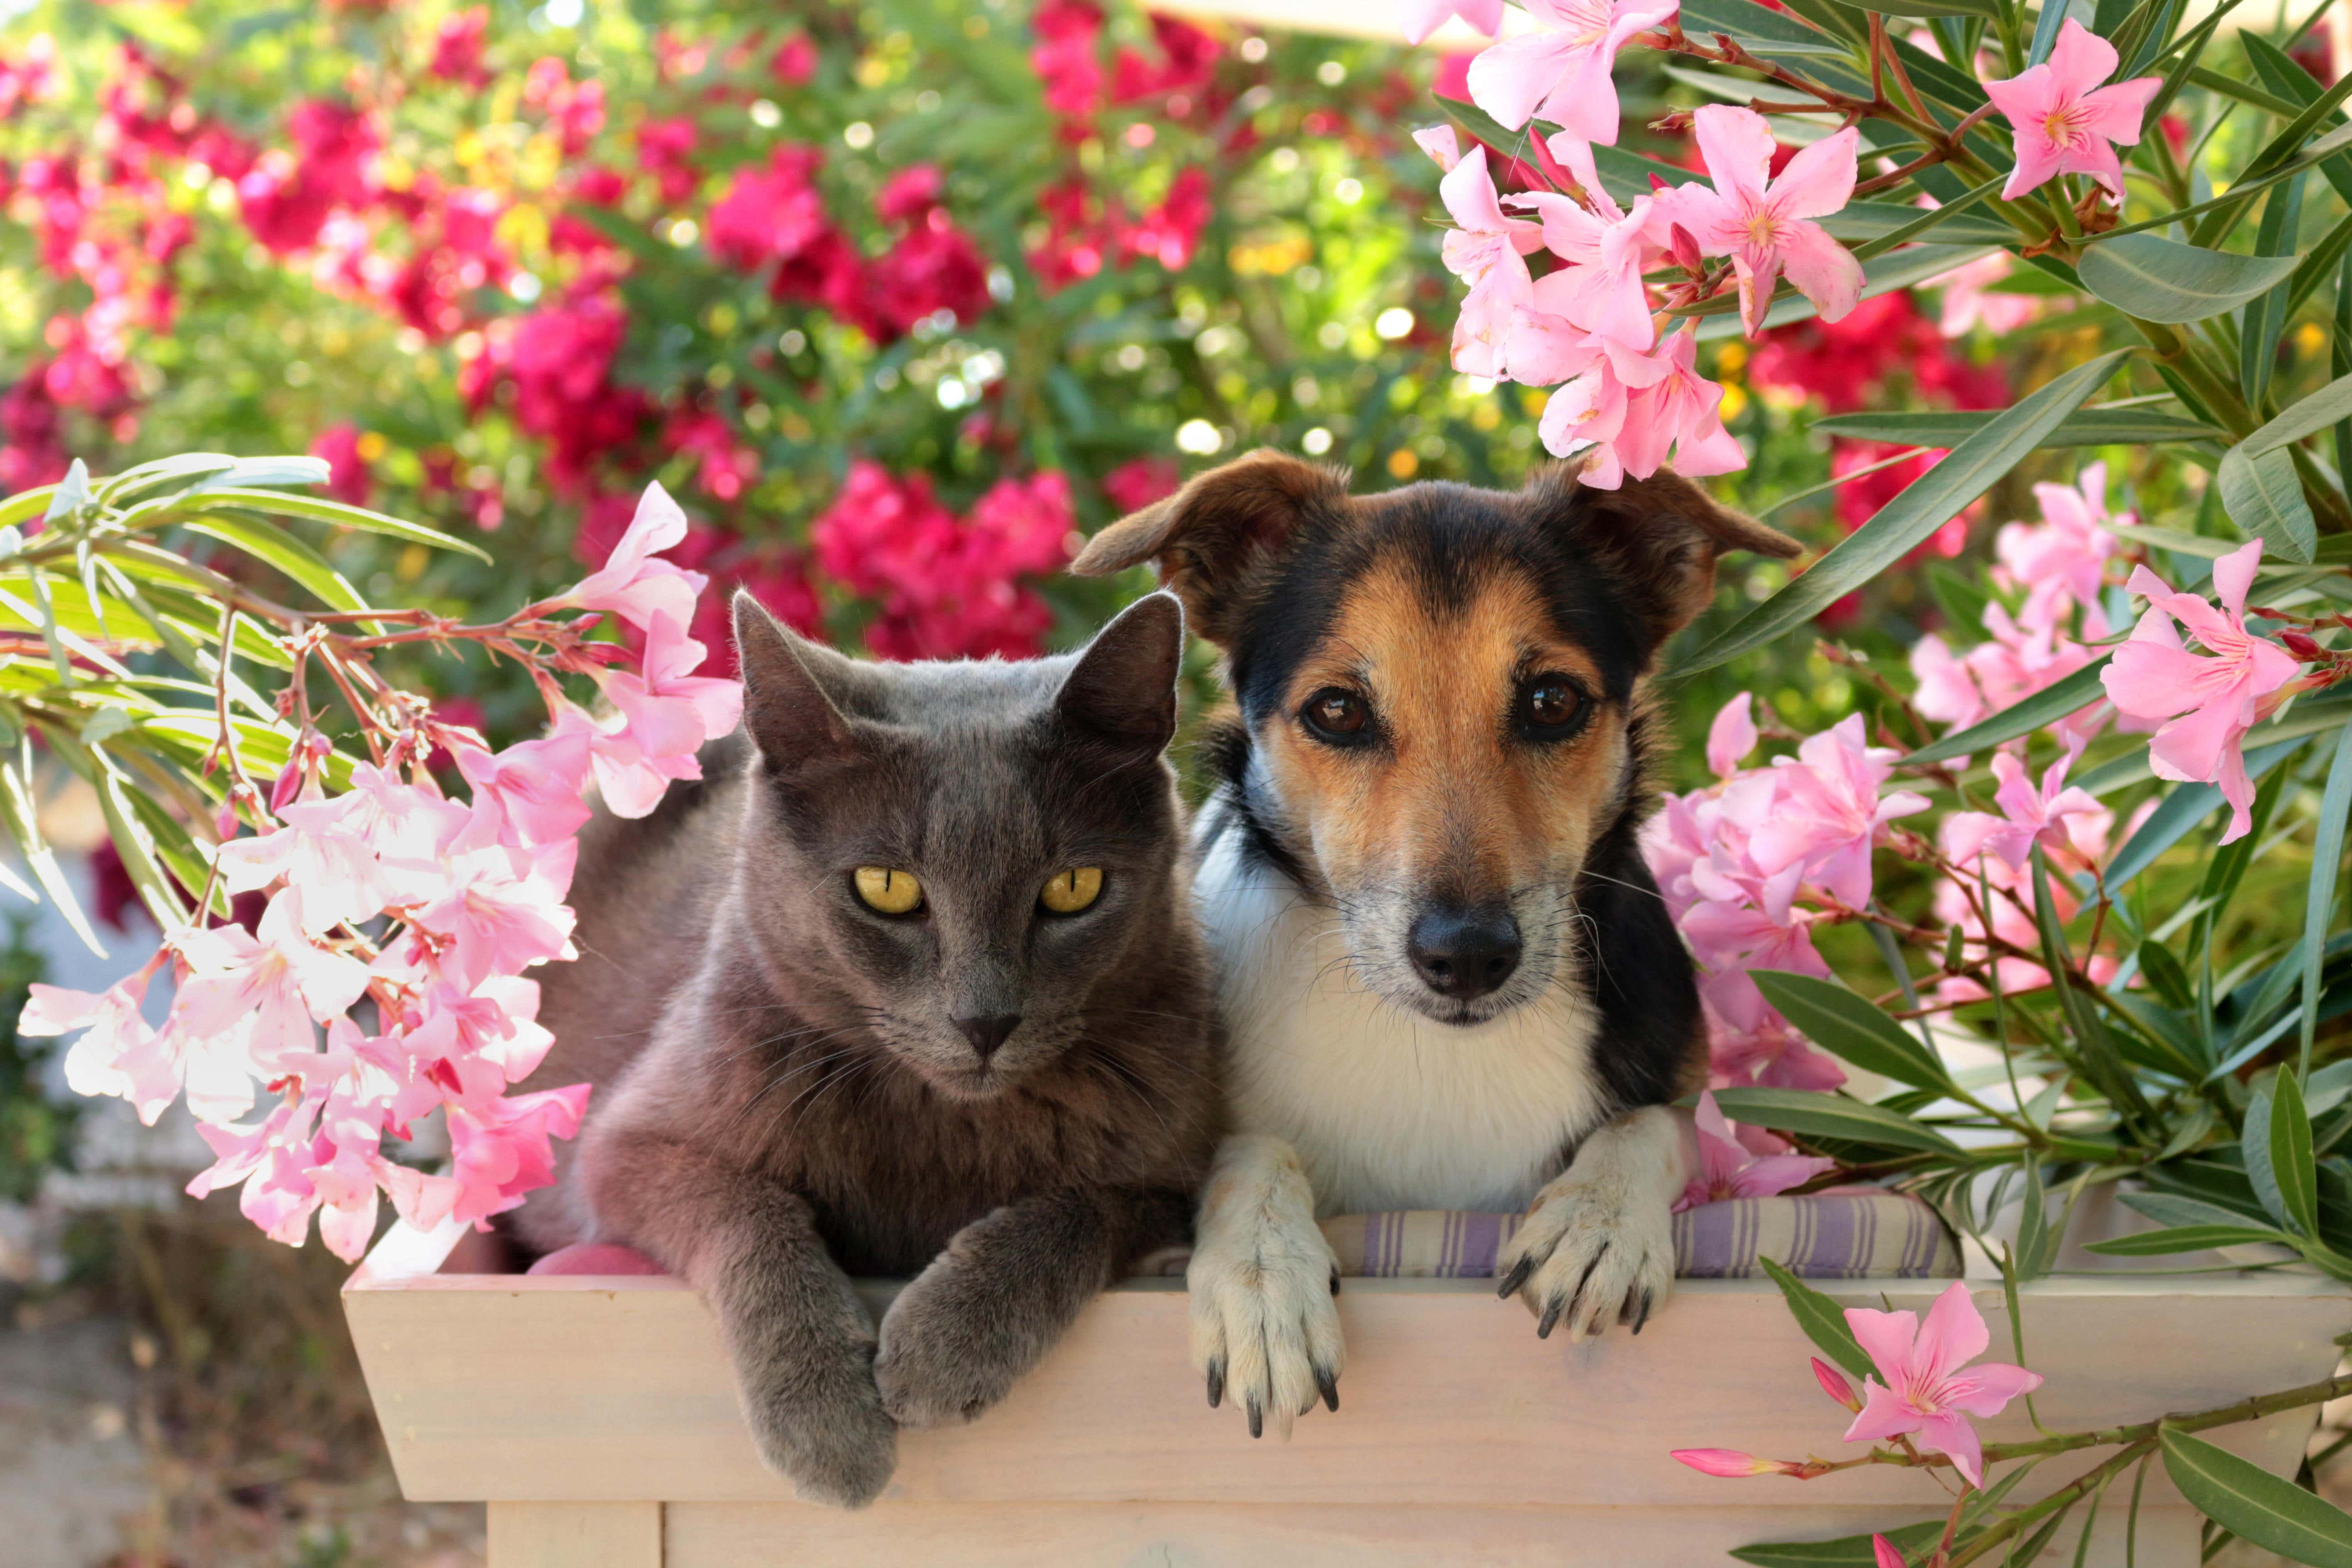 The European Food Safety Authority (EFSA) has urged people to keep cats and dogs inside